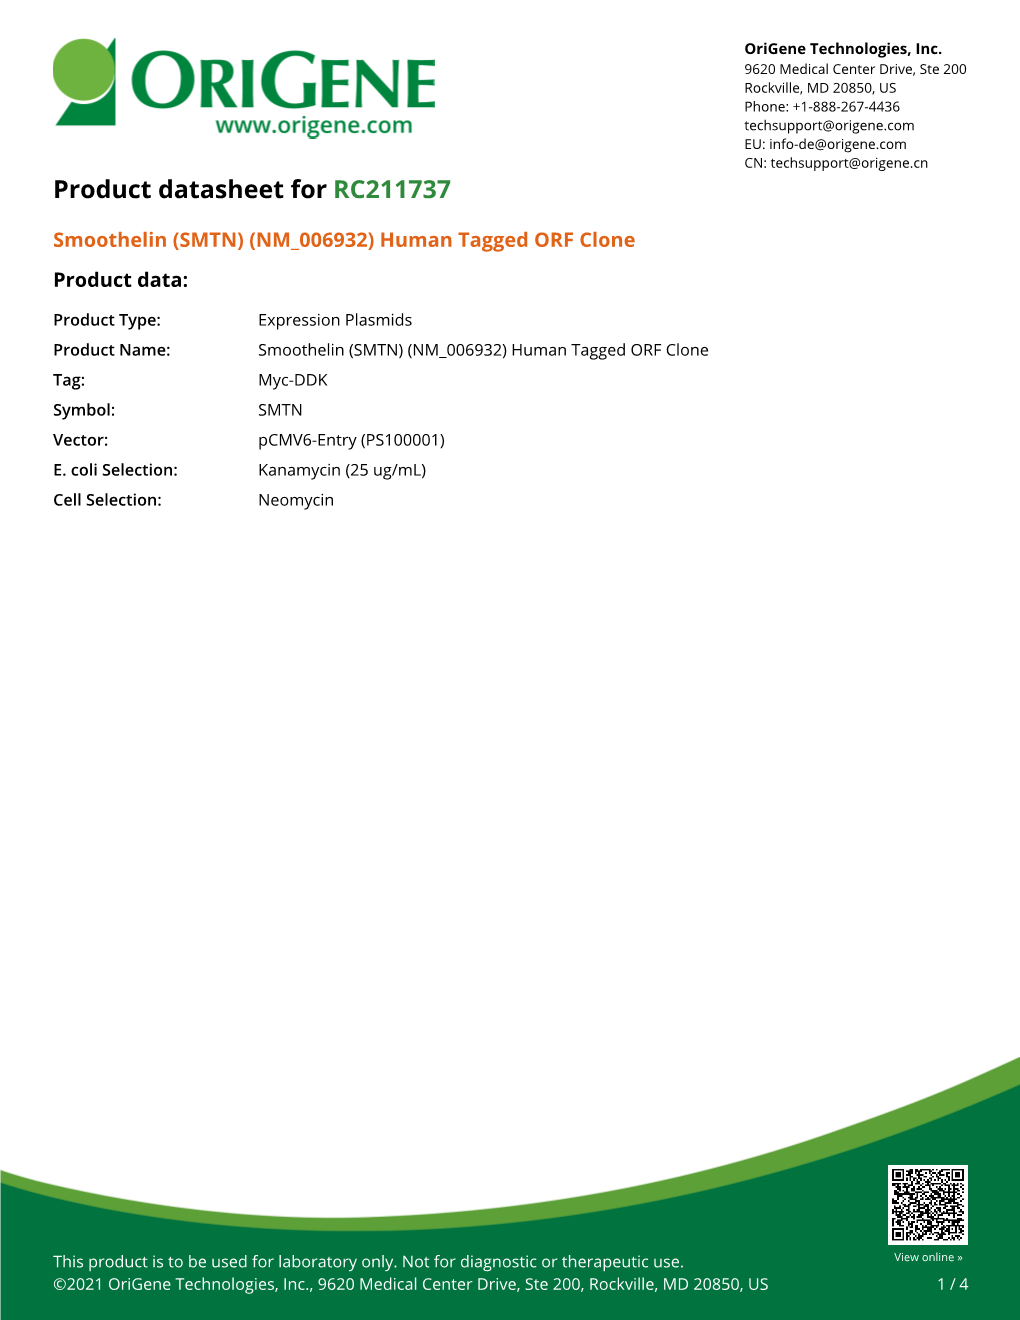 Smoothelin (SMTN) (NM 006932) Human Tagged ORF Clone Product Data